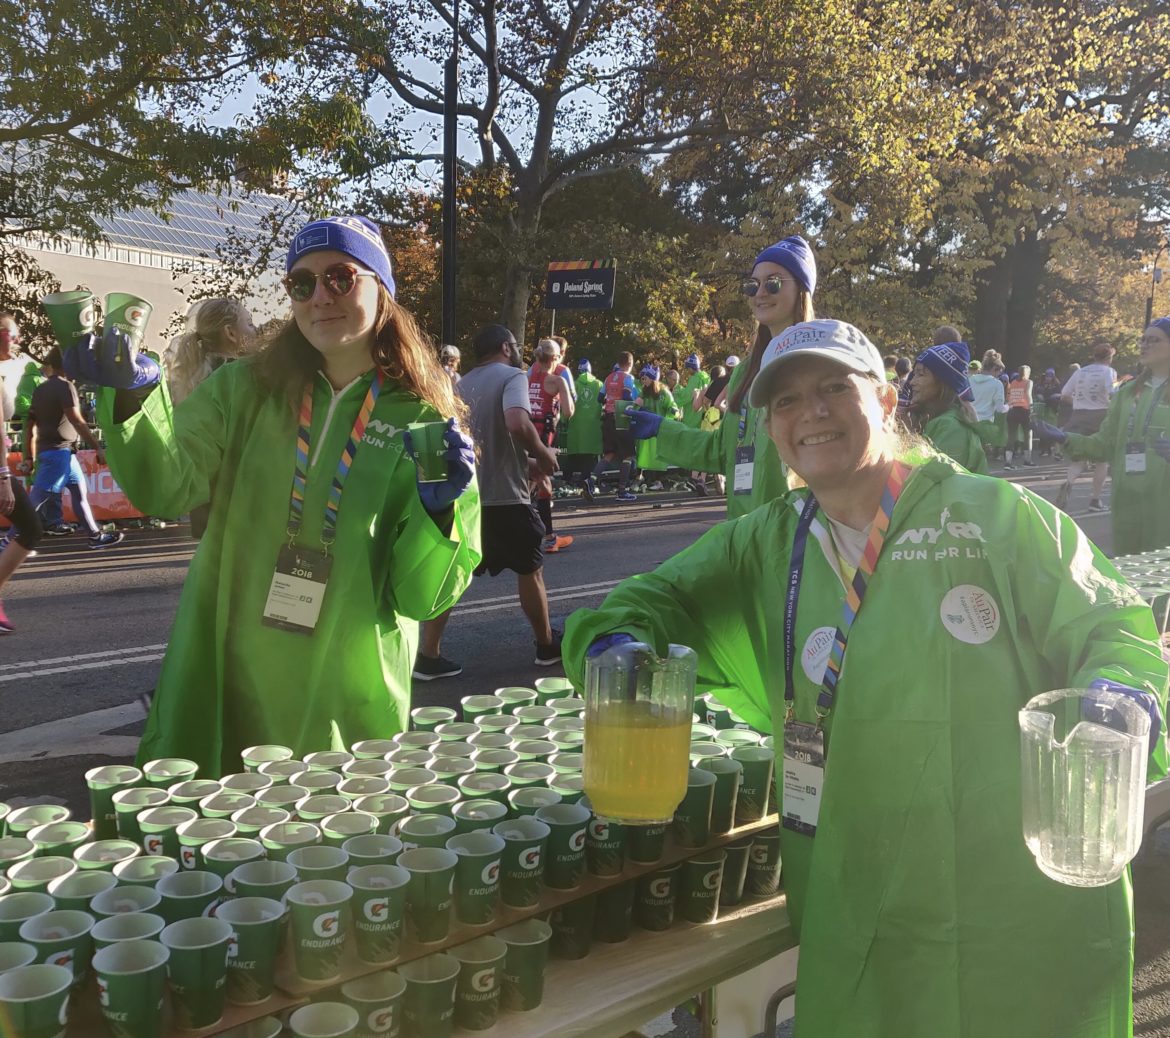 Hundreds of Au Pairs become “Au Pair Explorers” and Volunteer for the NYC Marathon | Au Pair in America